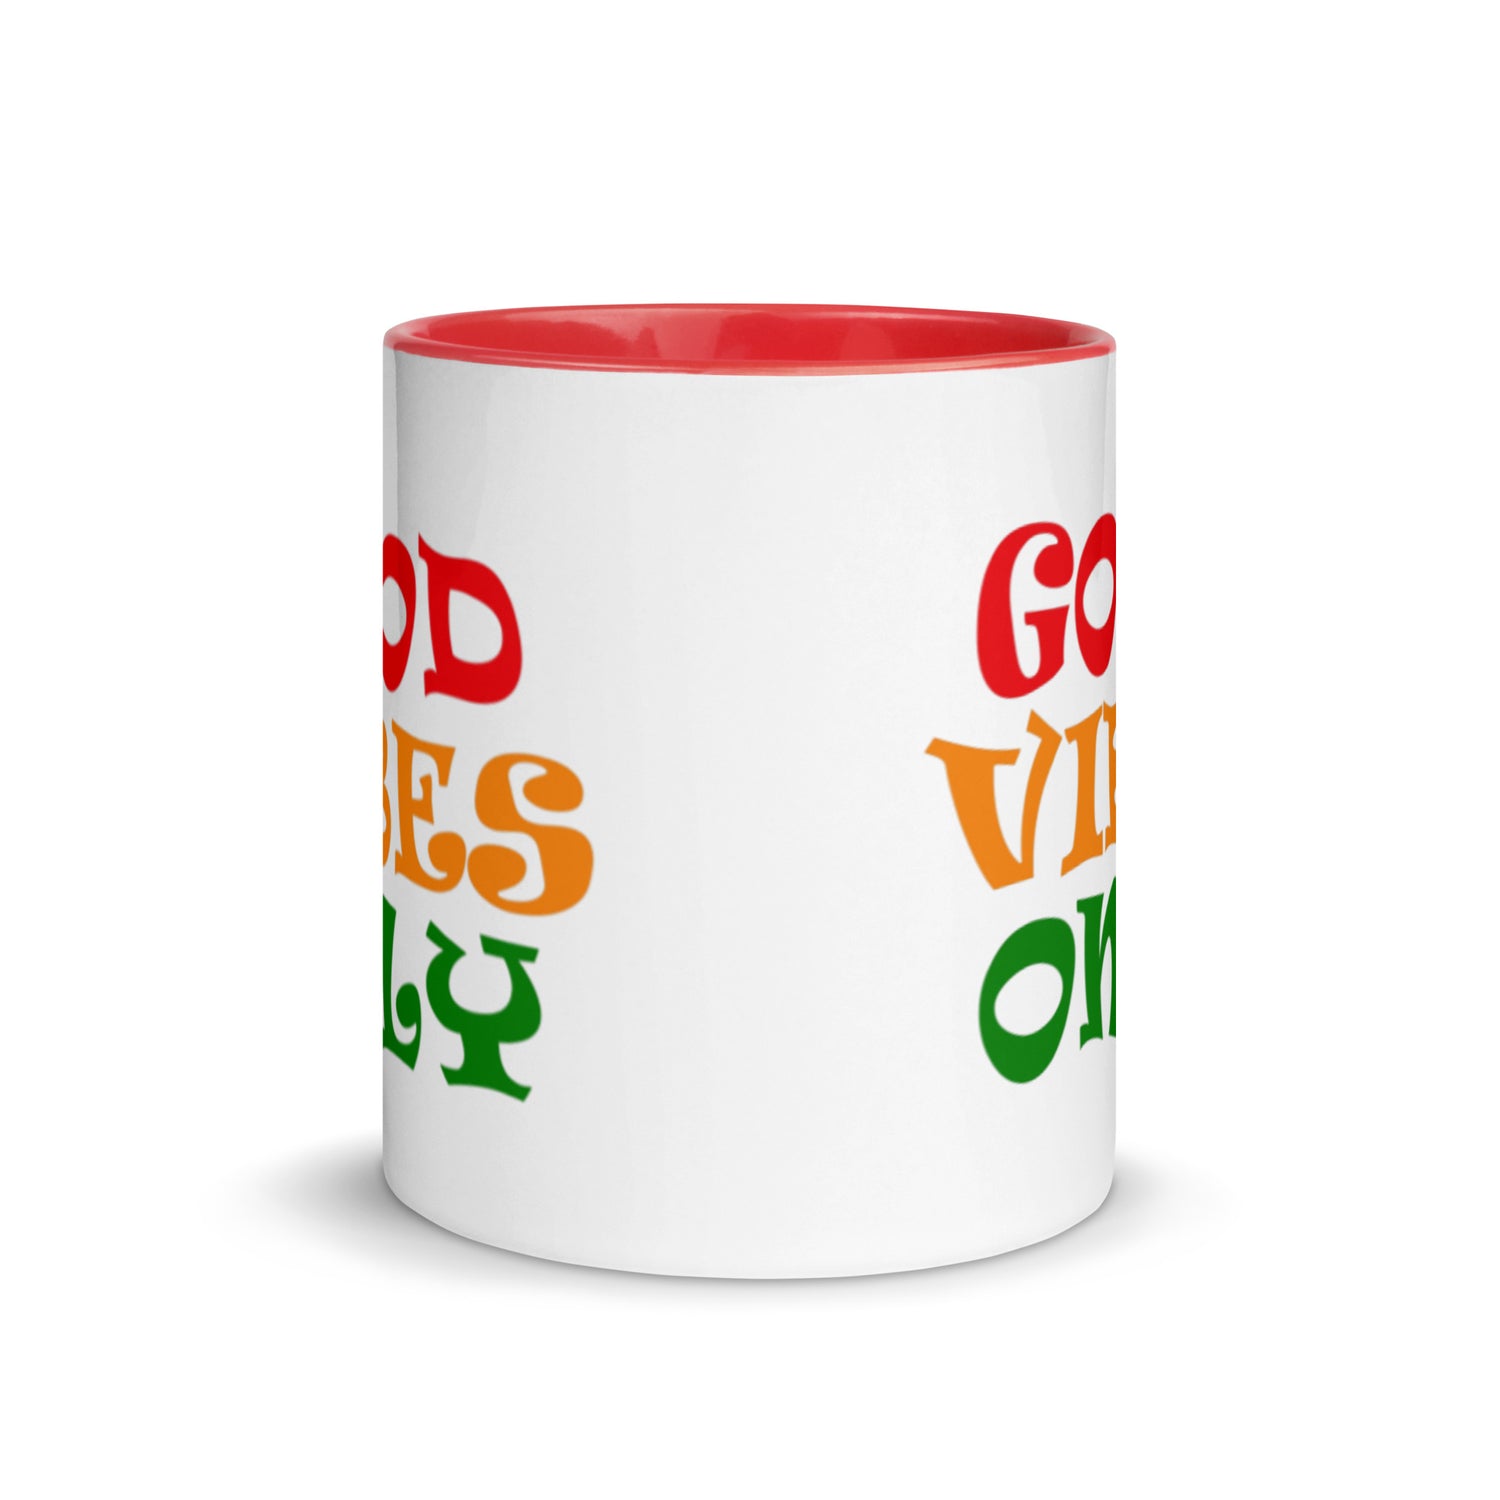 good vibes only ceramic mug, red interior and red handle